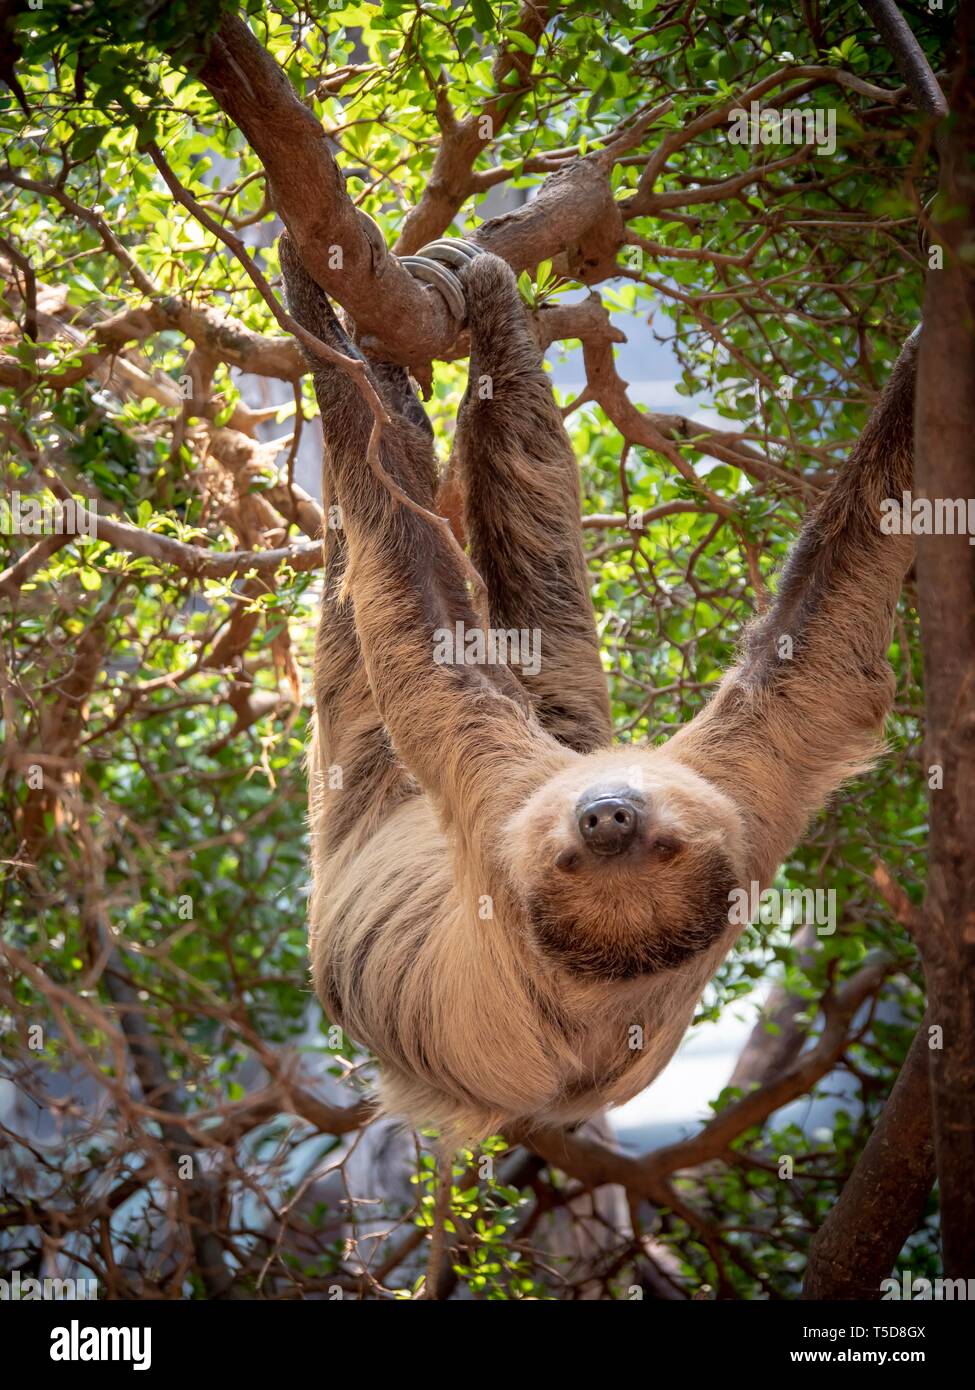 A sloth hanging upside down in the branches of a tree Stock Photo